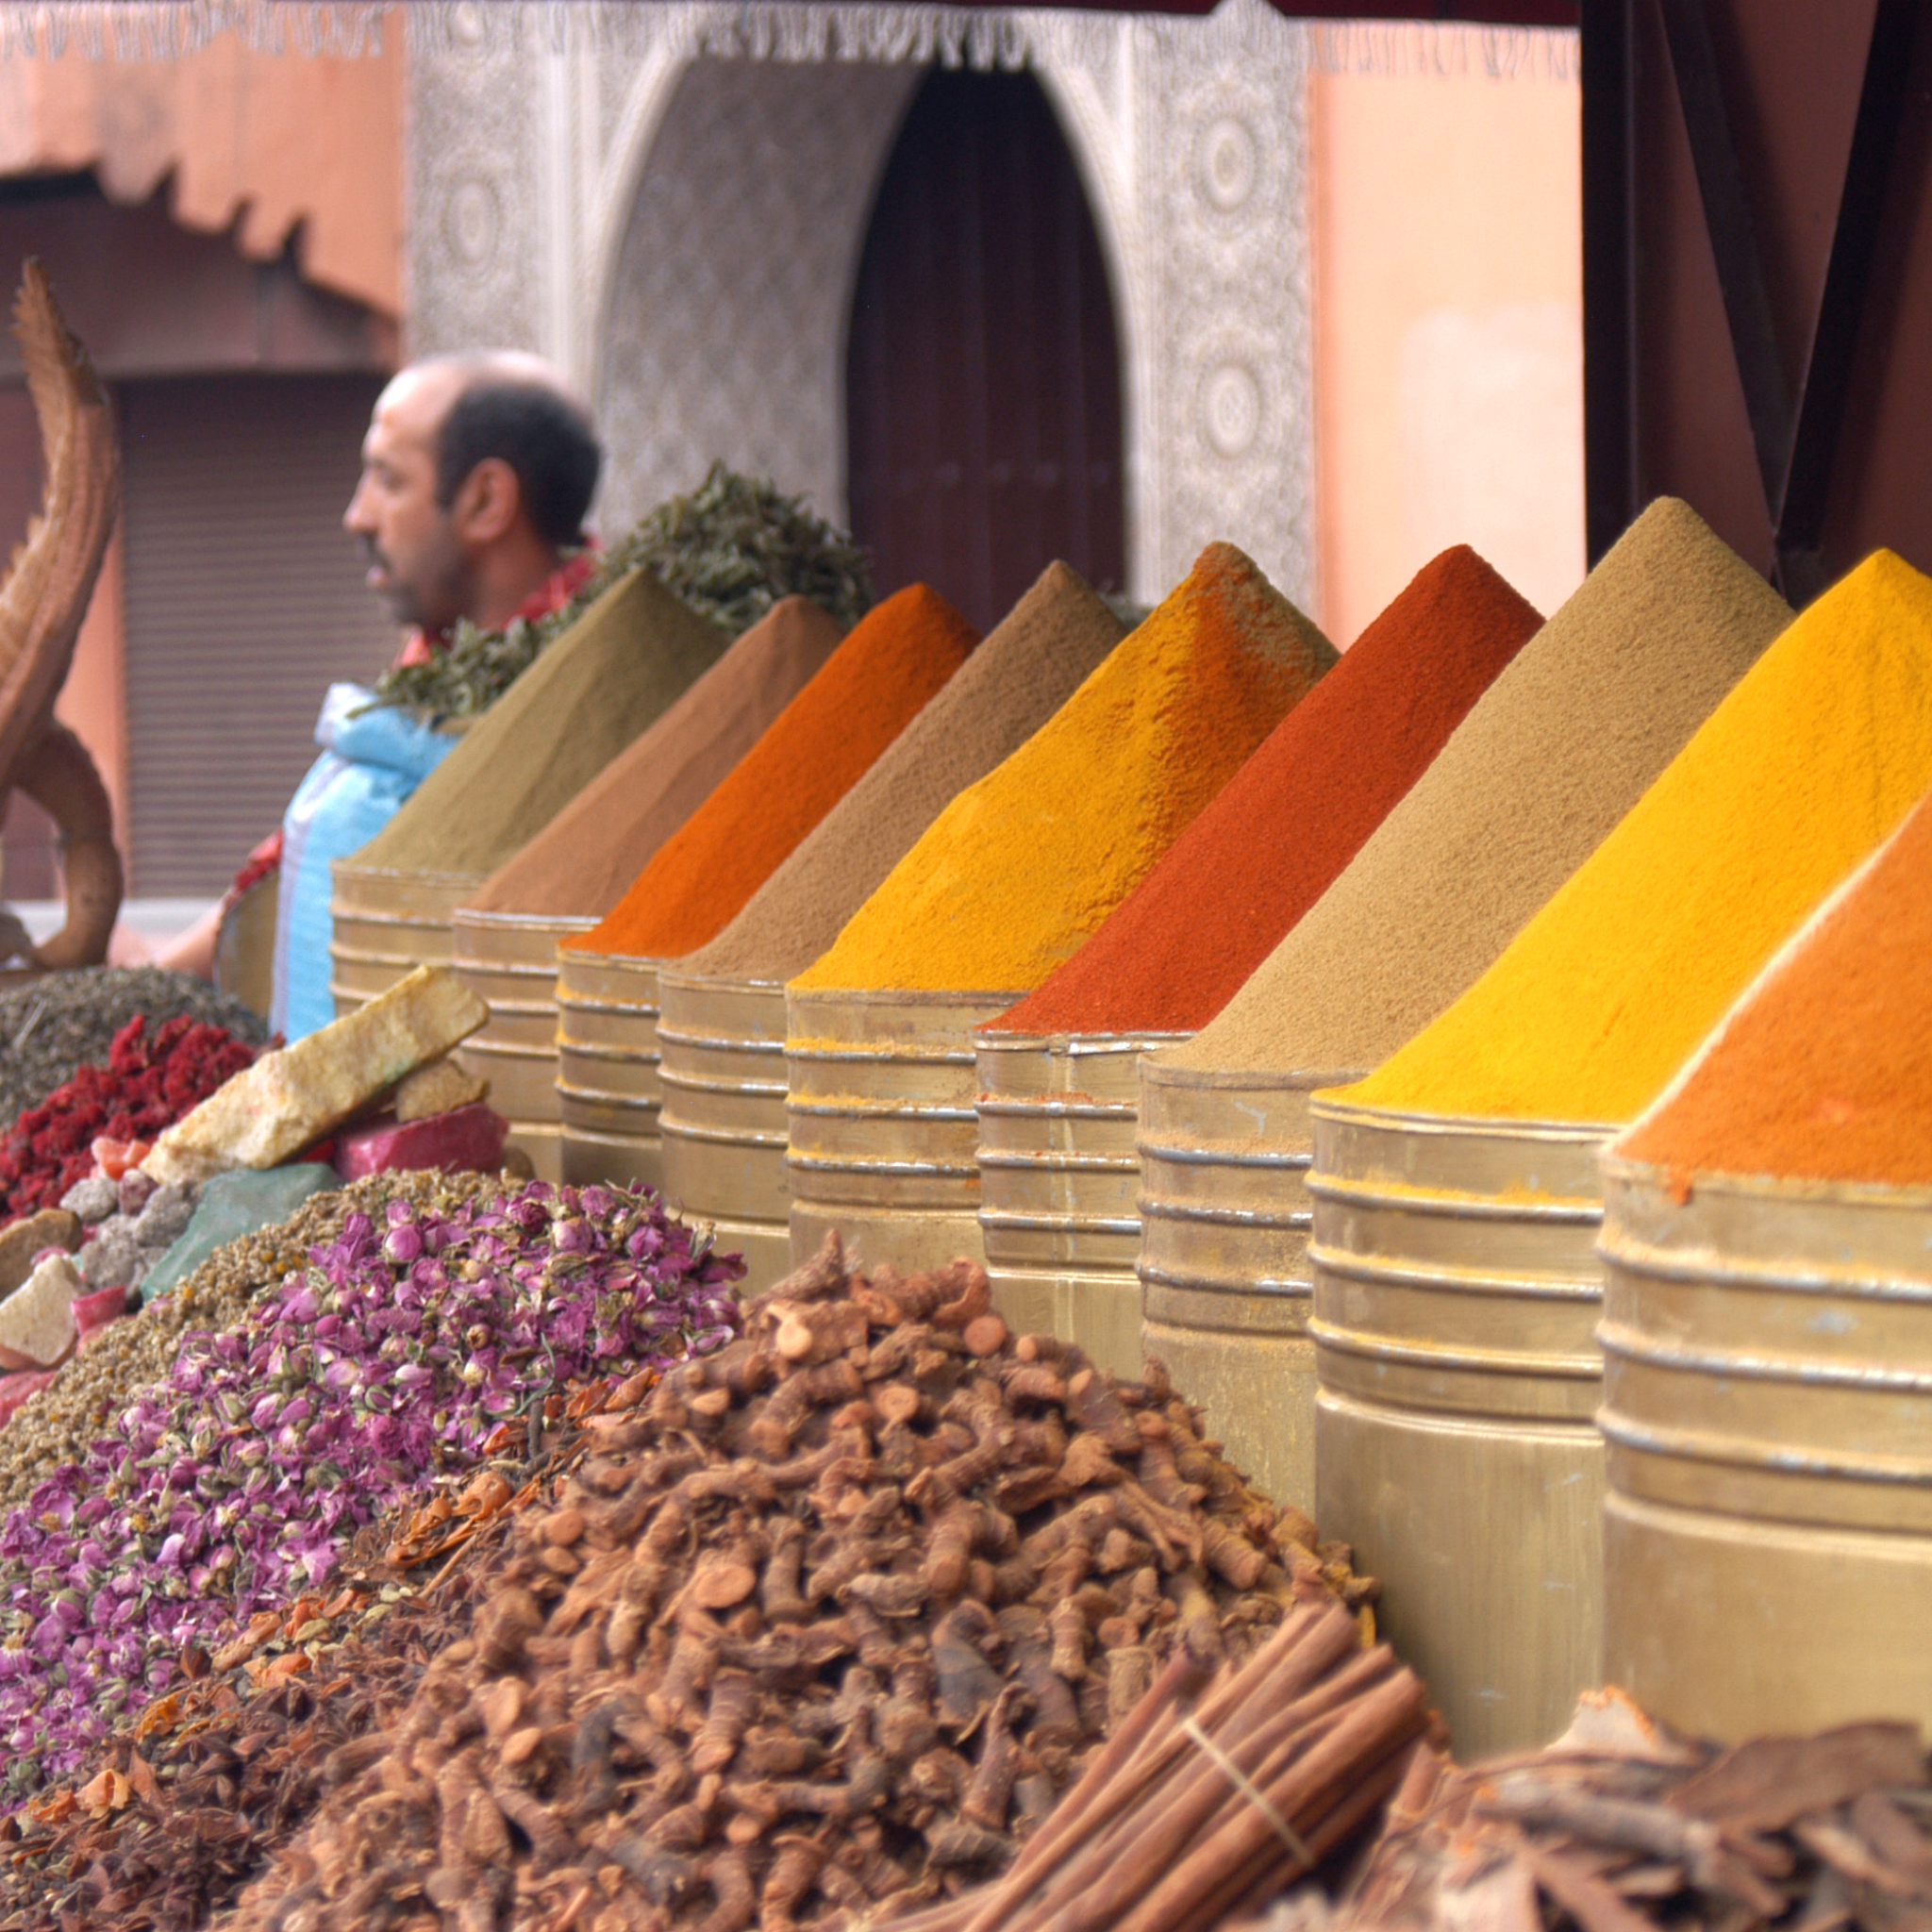 Spice Market in Marrakech Morocco 5 places to visit